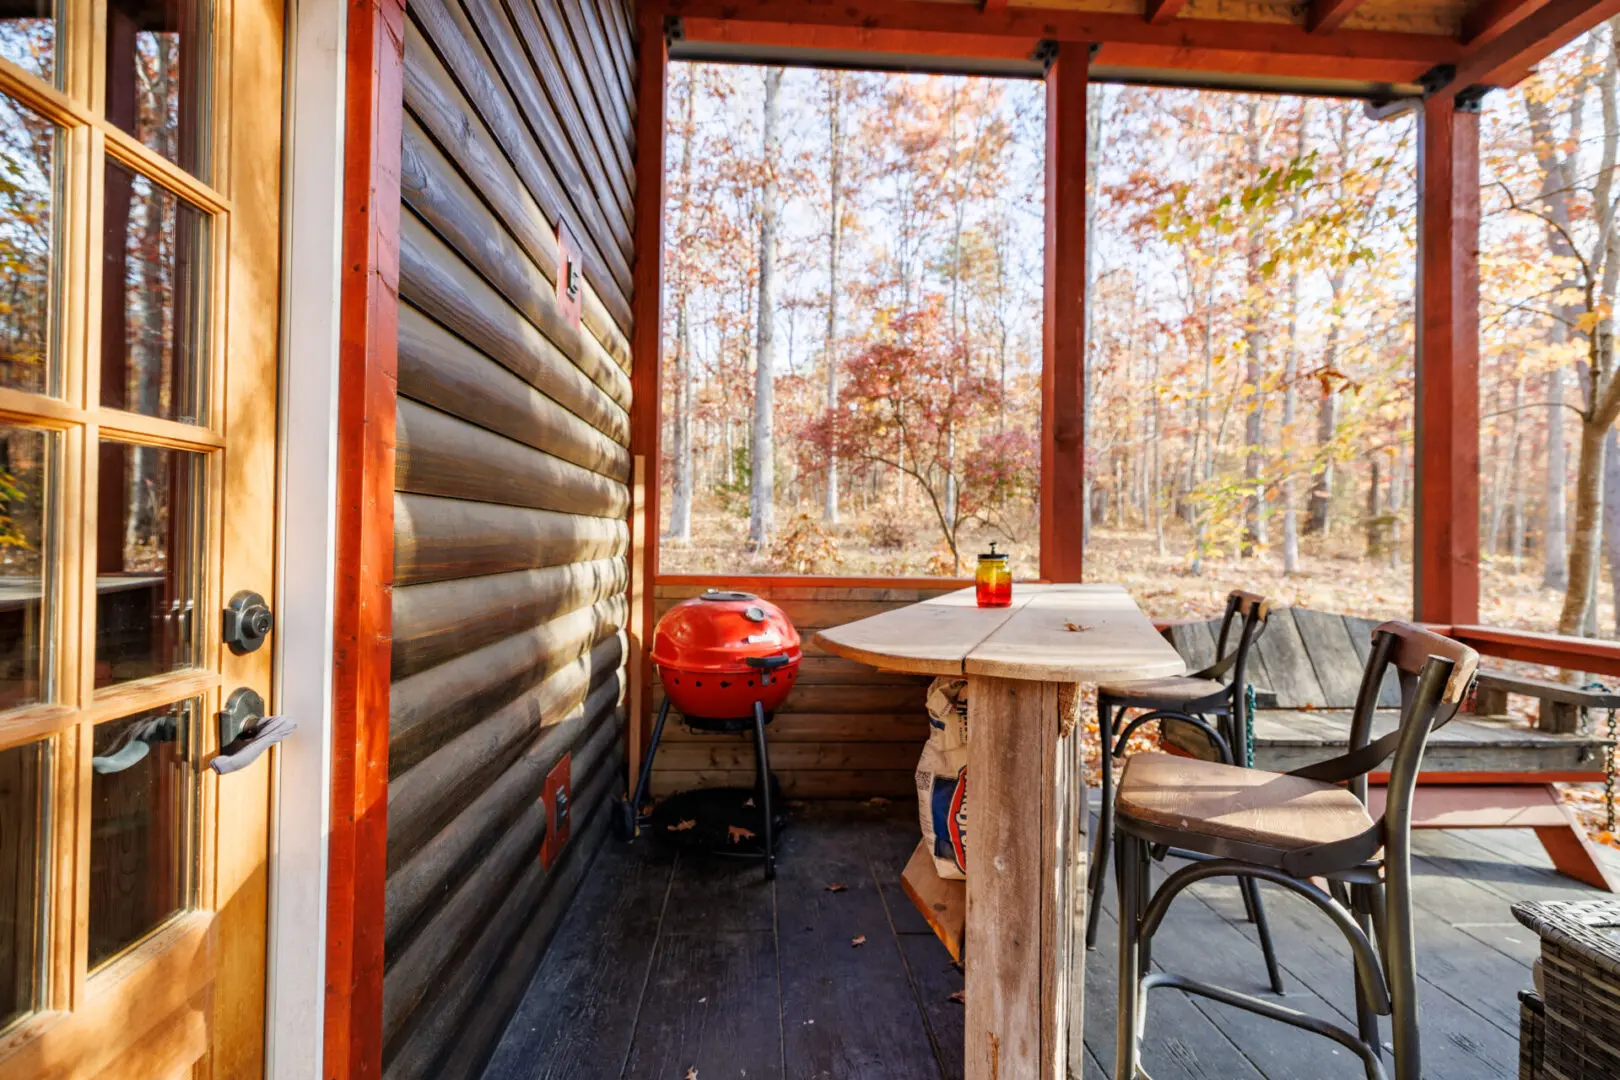 A screened in porch with a table and chairs, located at Little River Point.